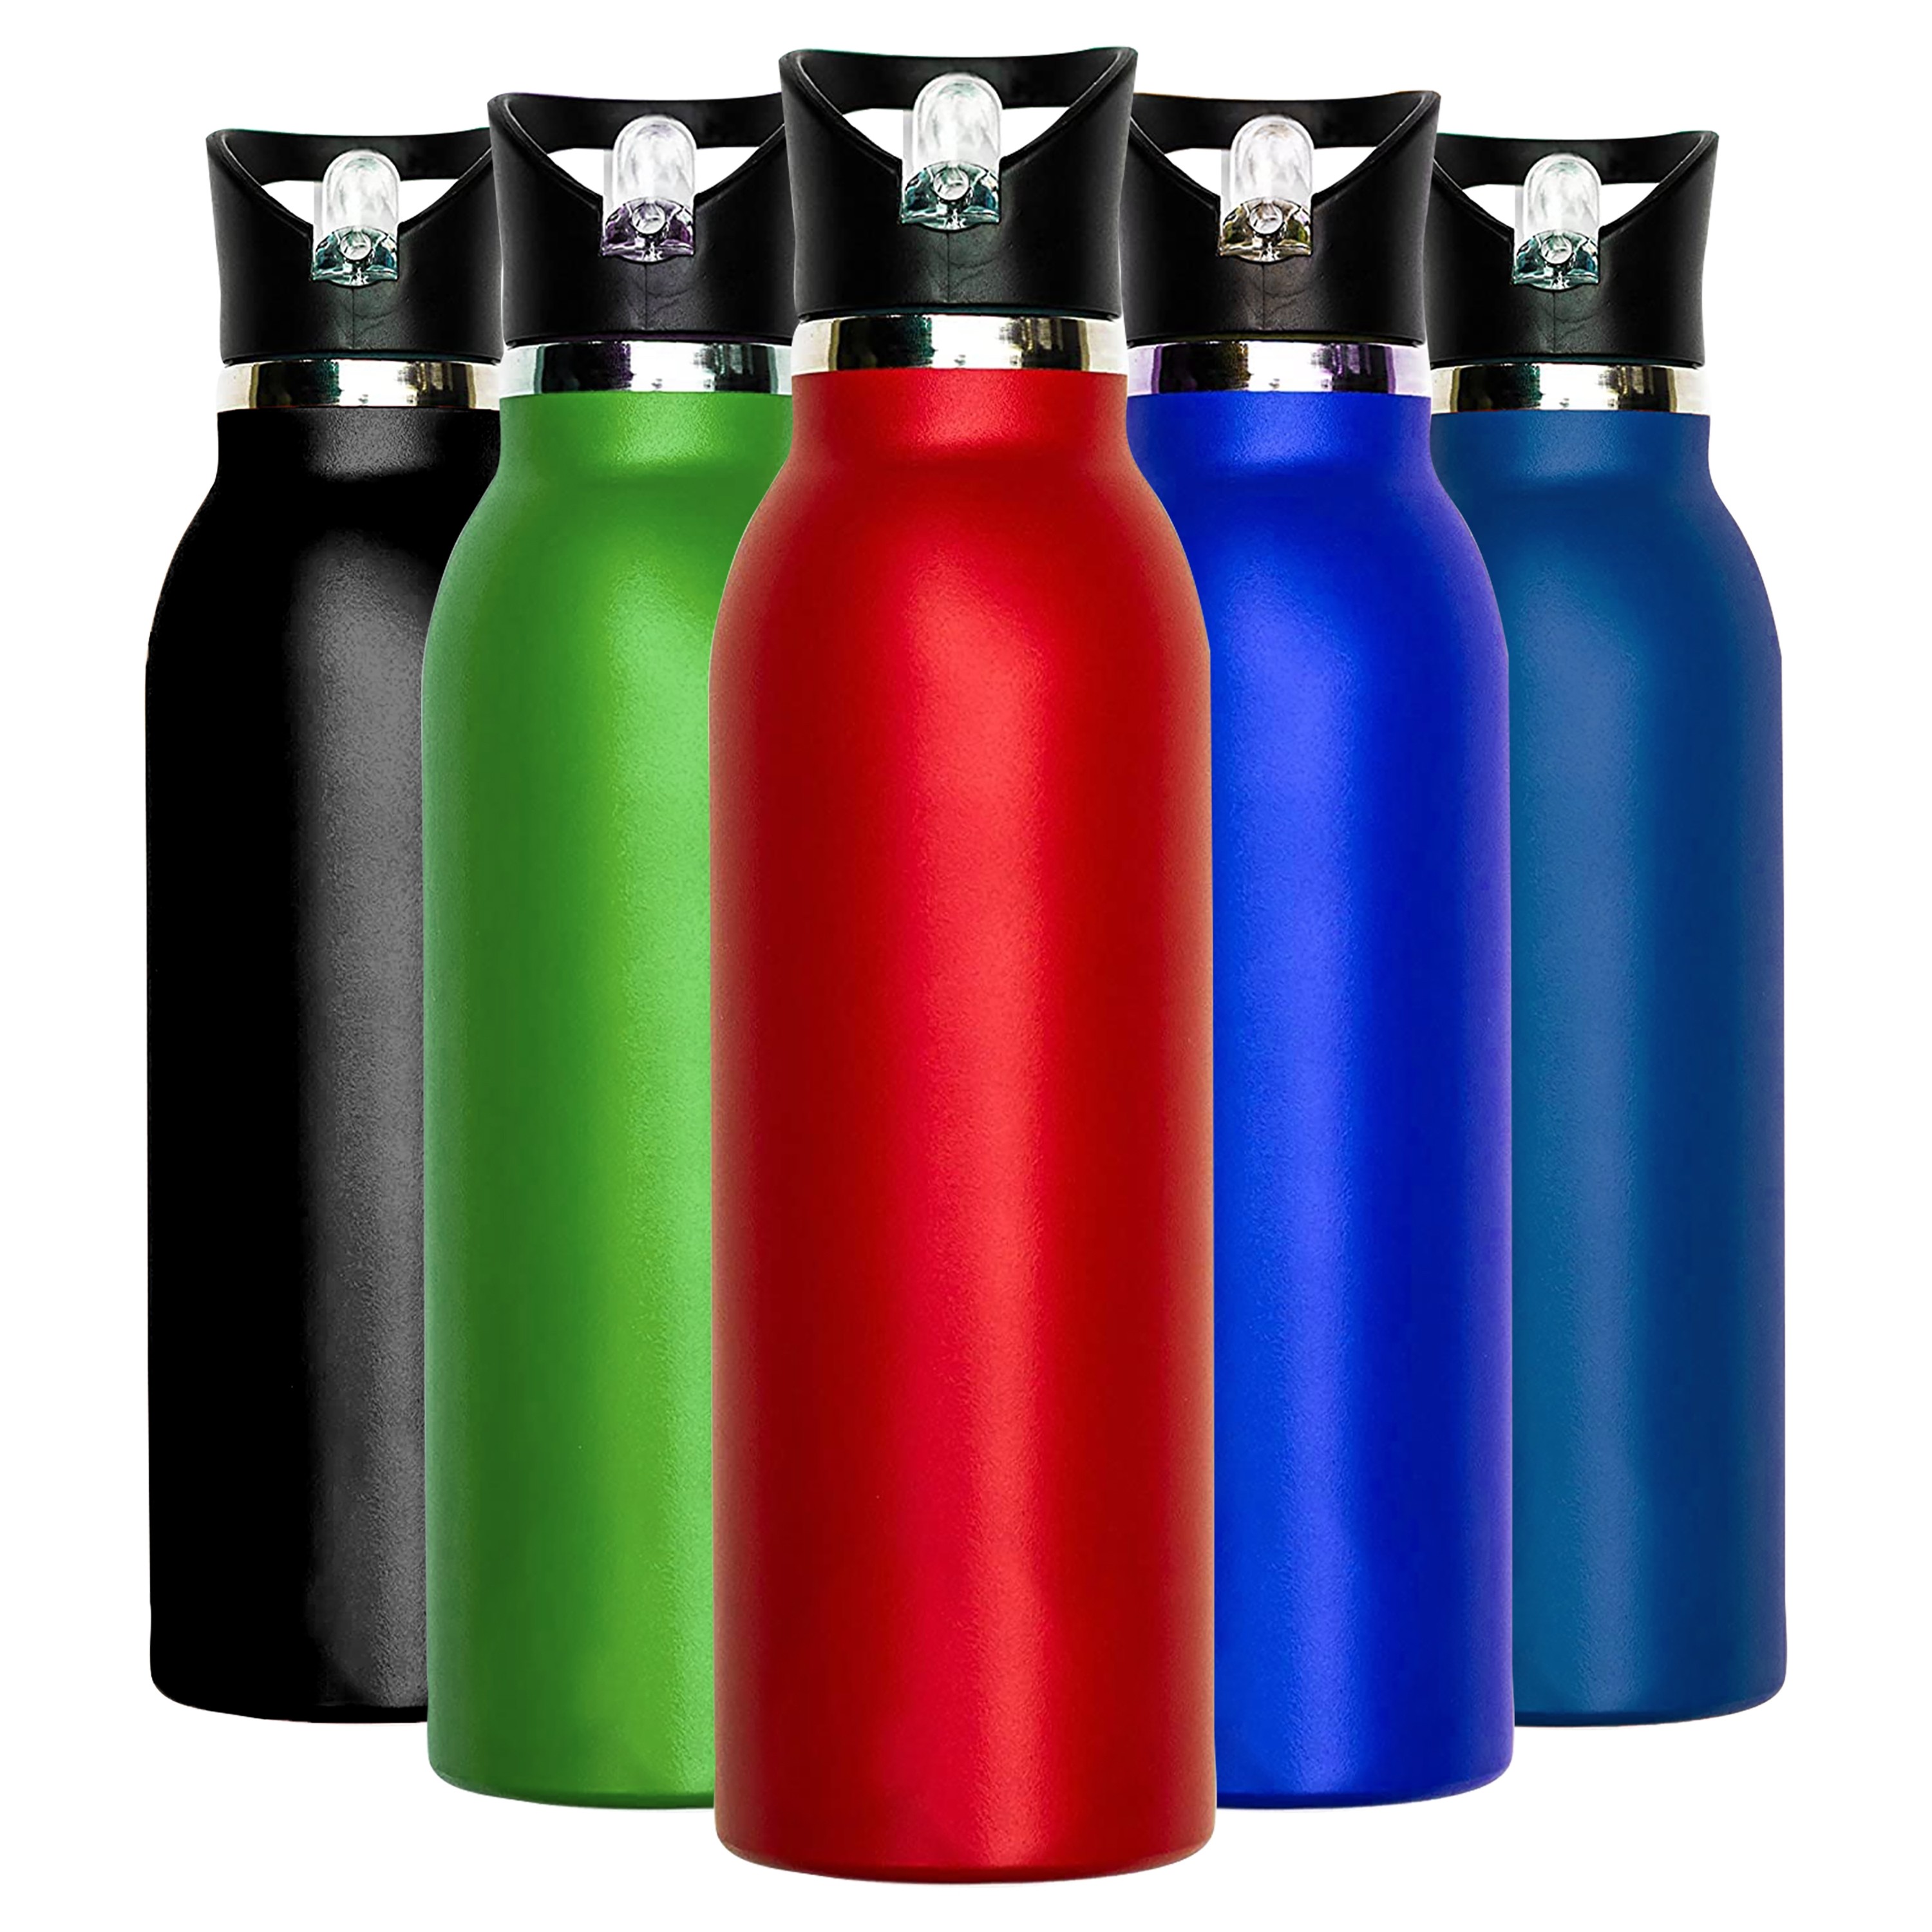 Millenti Stainless Steel 21oz Powder Coated Water Bottles - Red